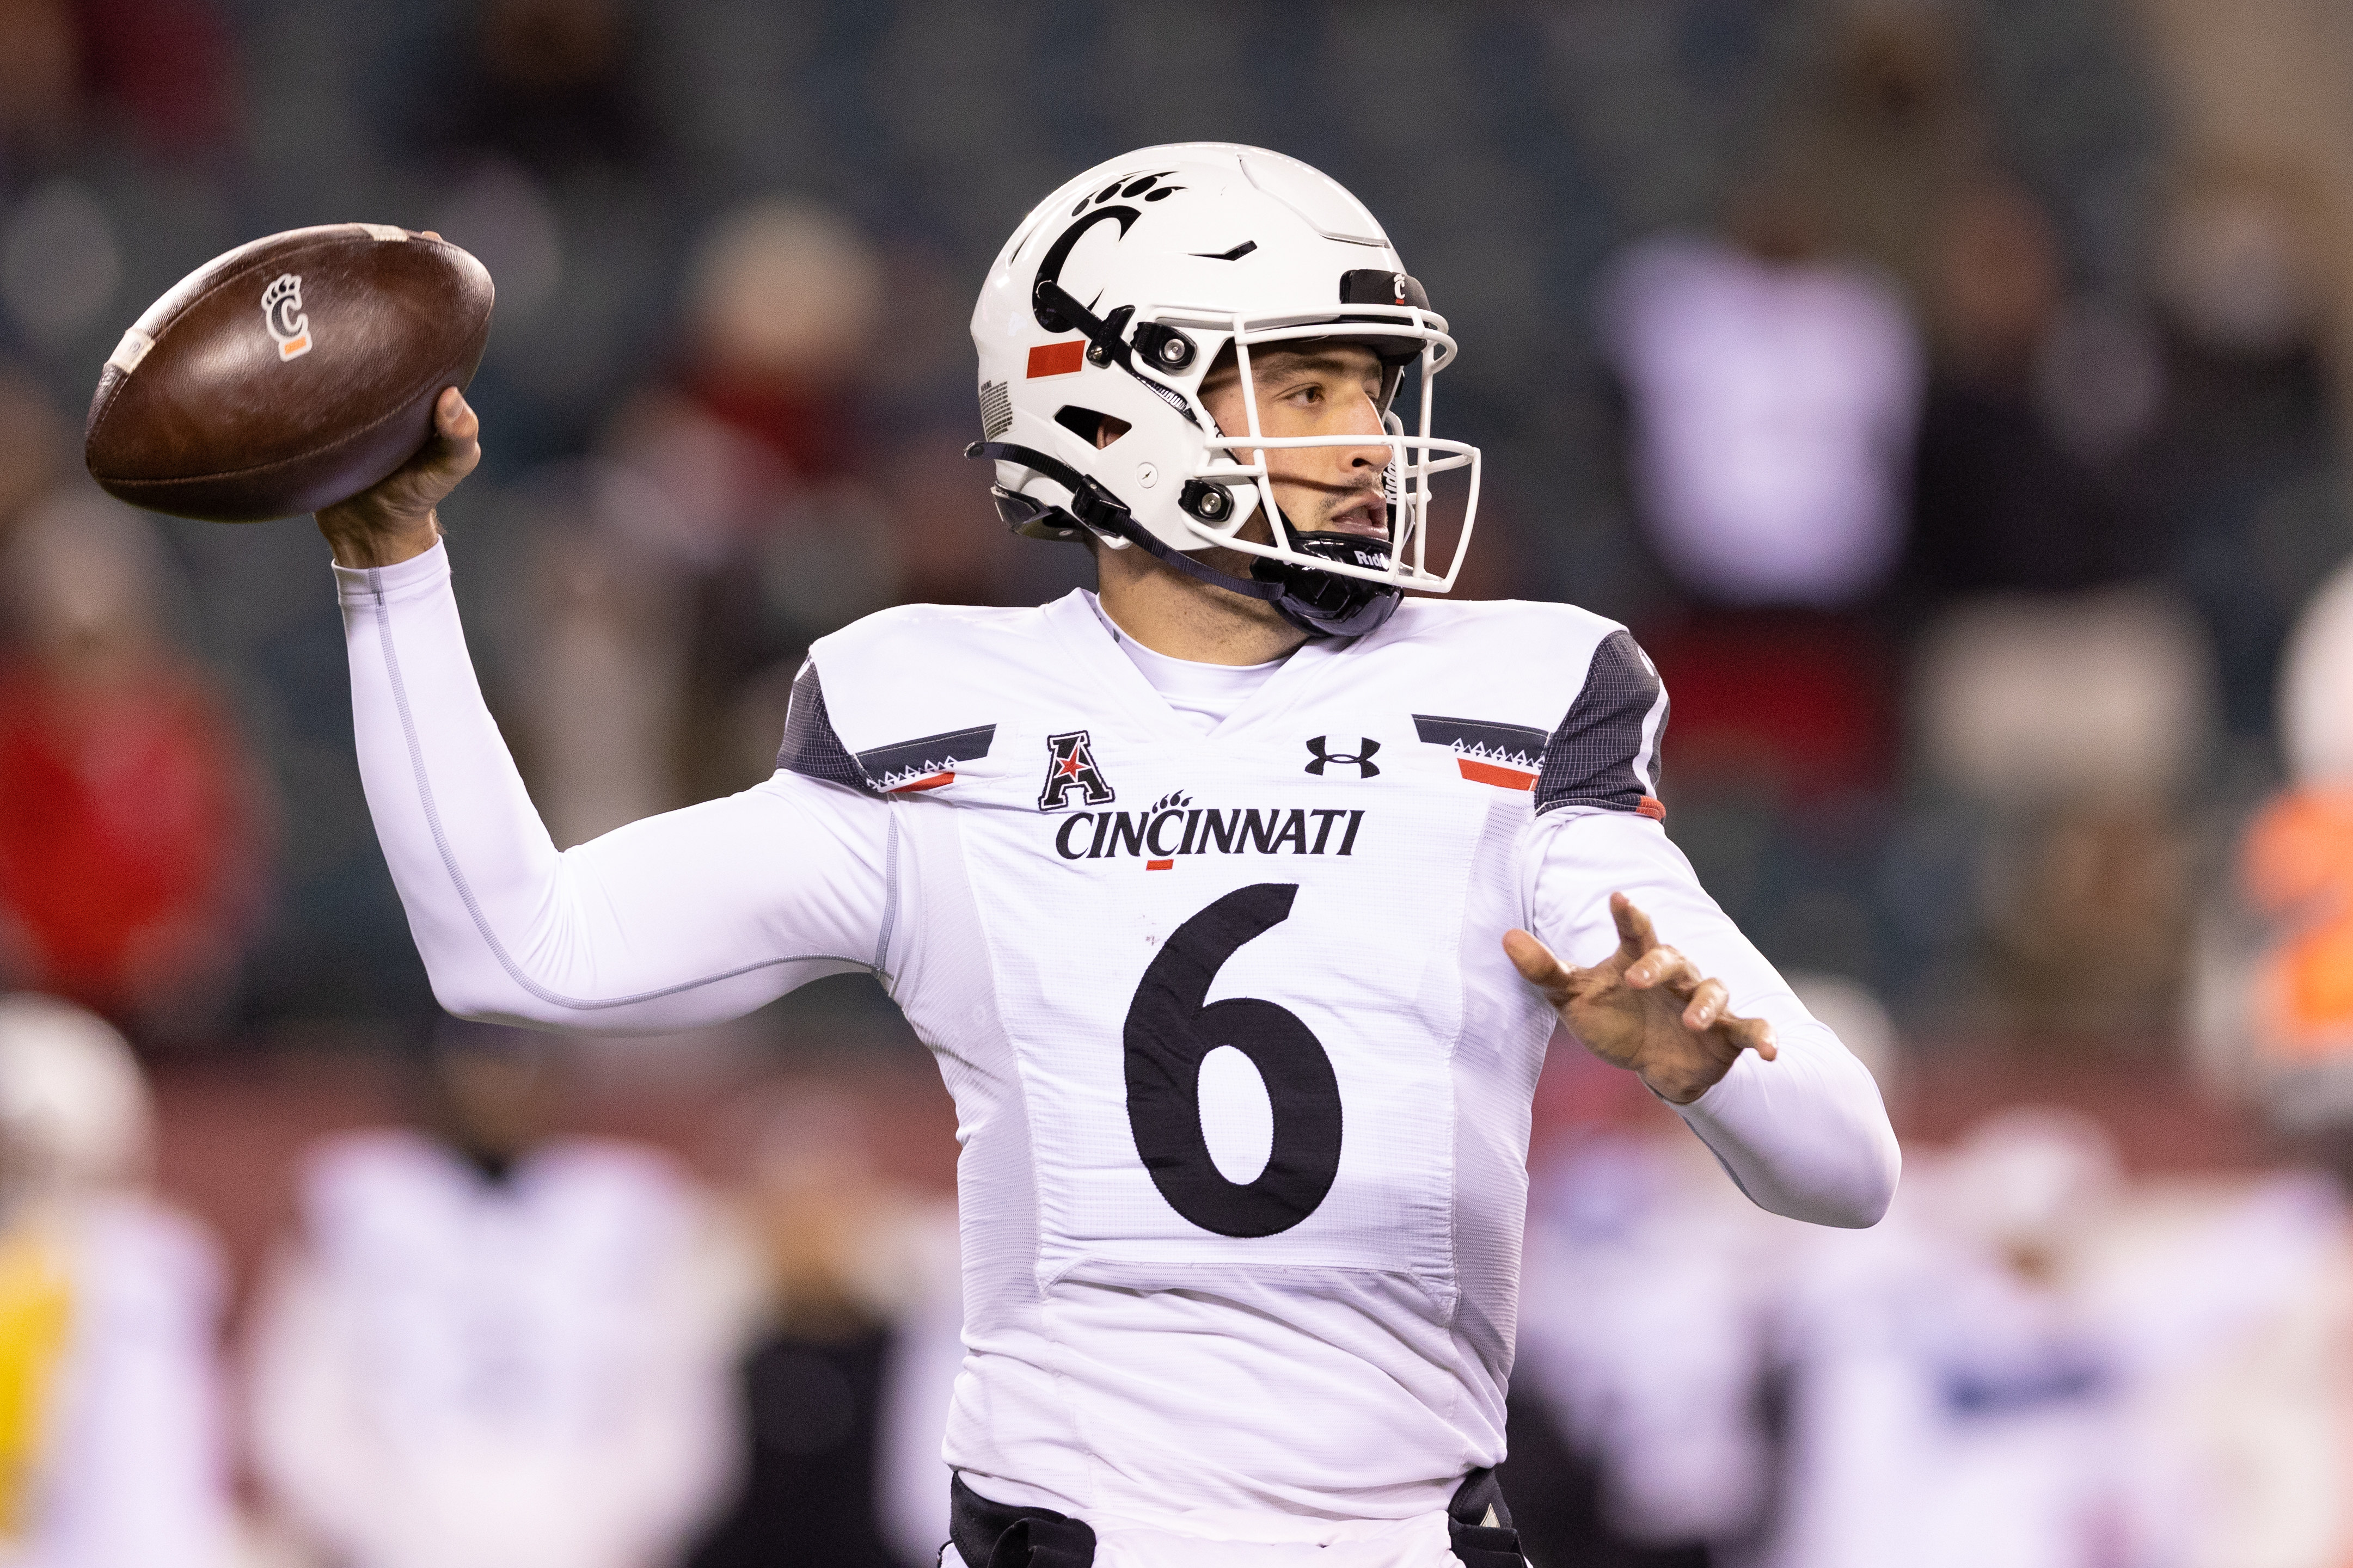 Cincinnati Bearcats quarterback Ben Bryant passes the ball against the Temple Owls during the second quarter at Lincoln Financial Field.